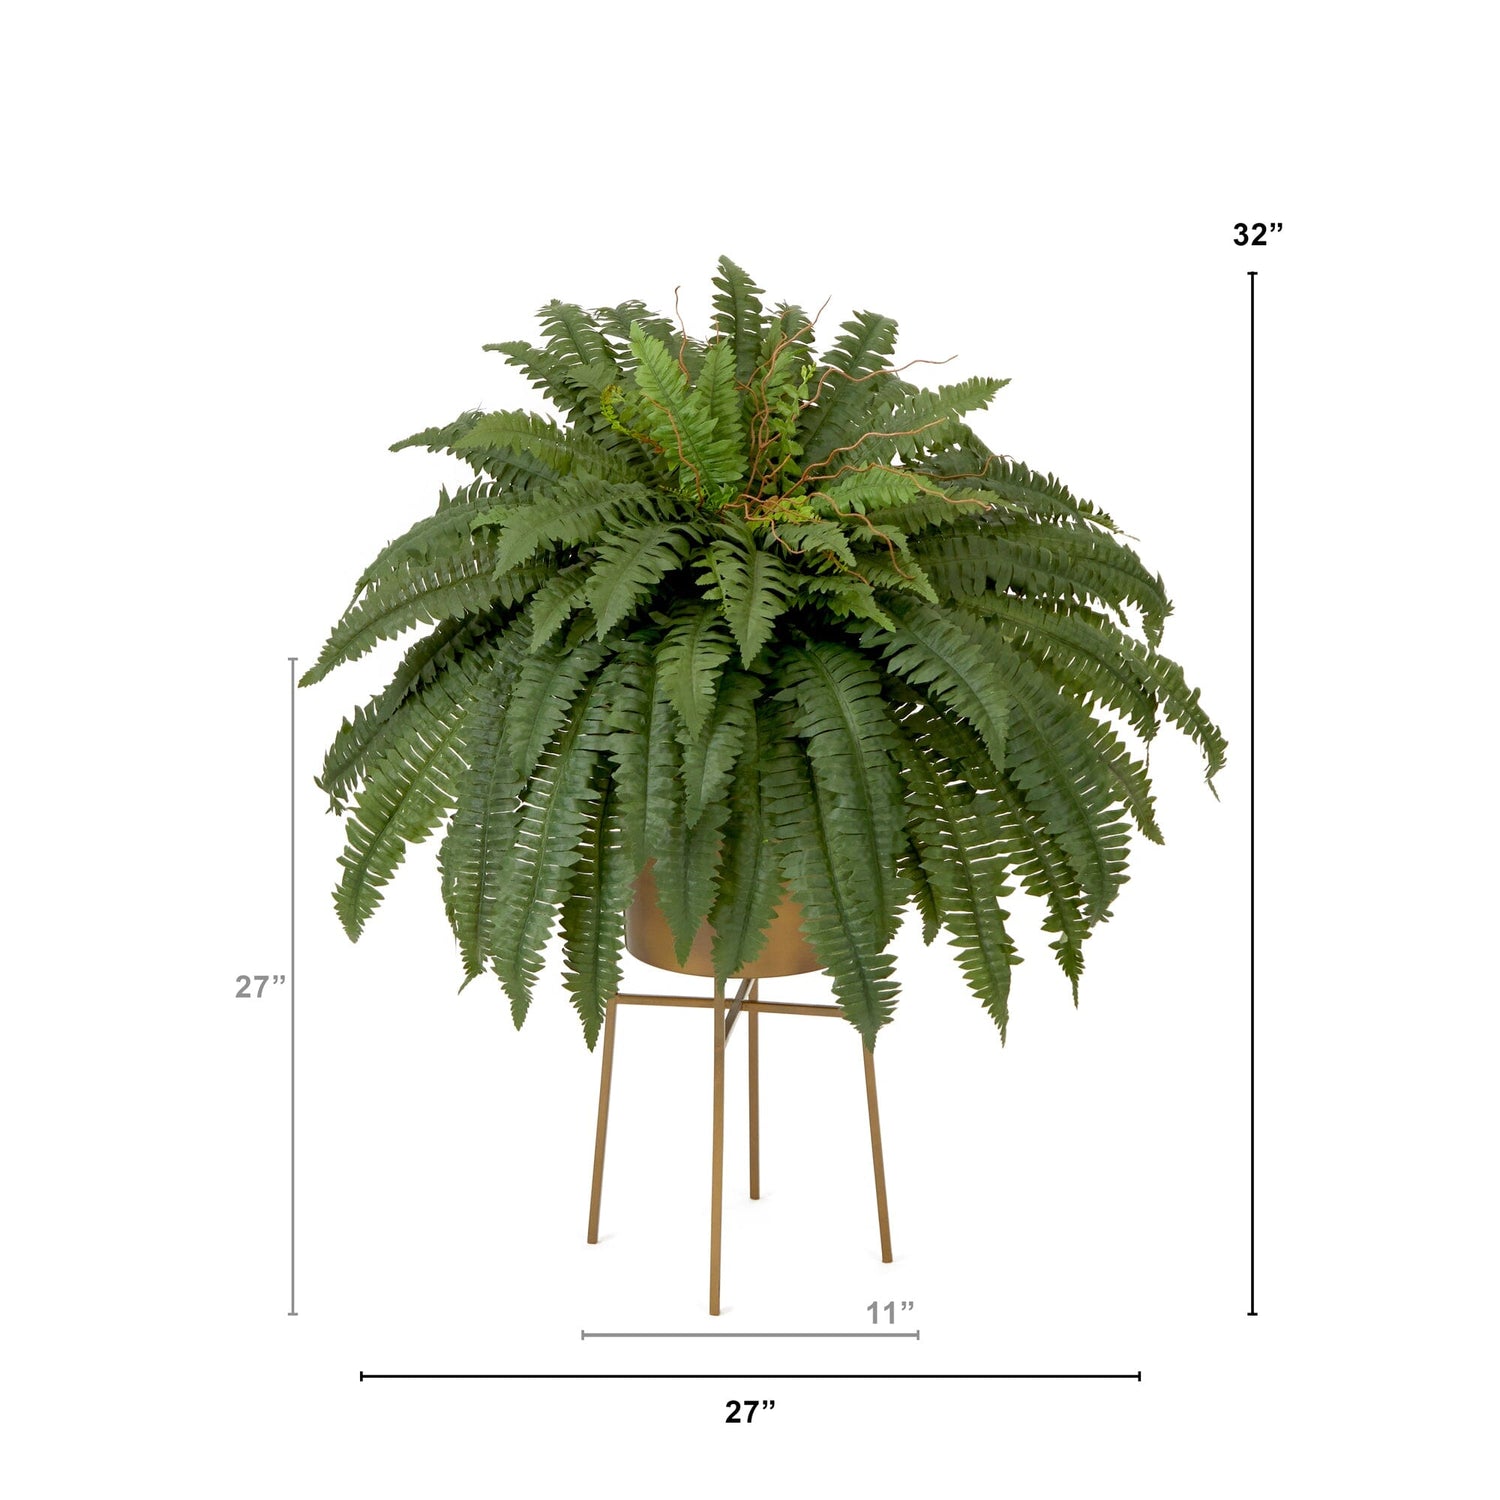 32” Artificial Boston Fern Plant with Metal Planter with Stand DIY KIT